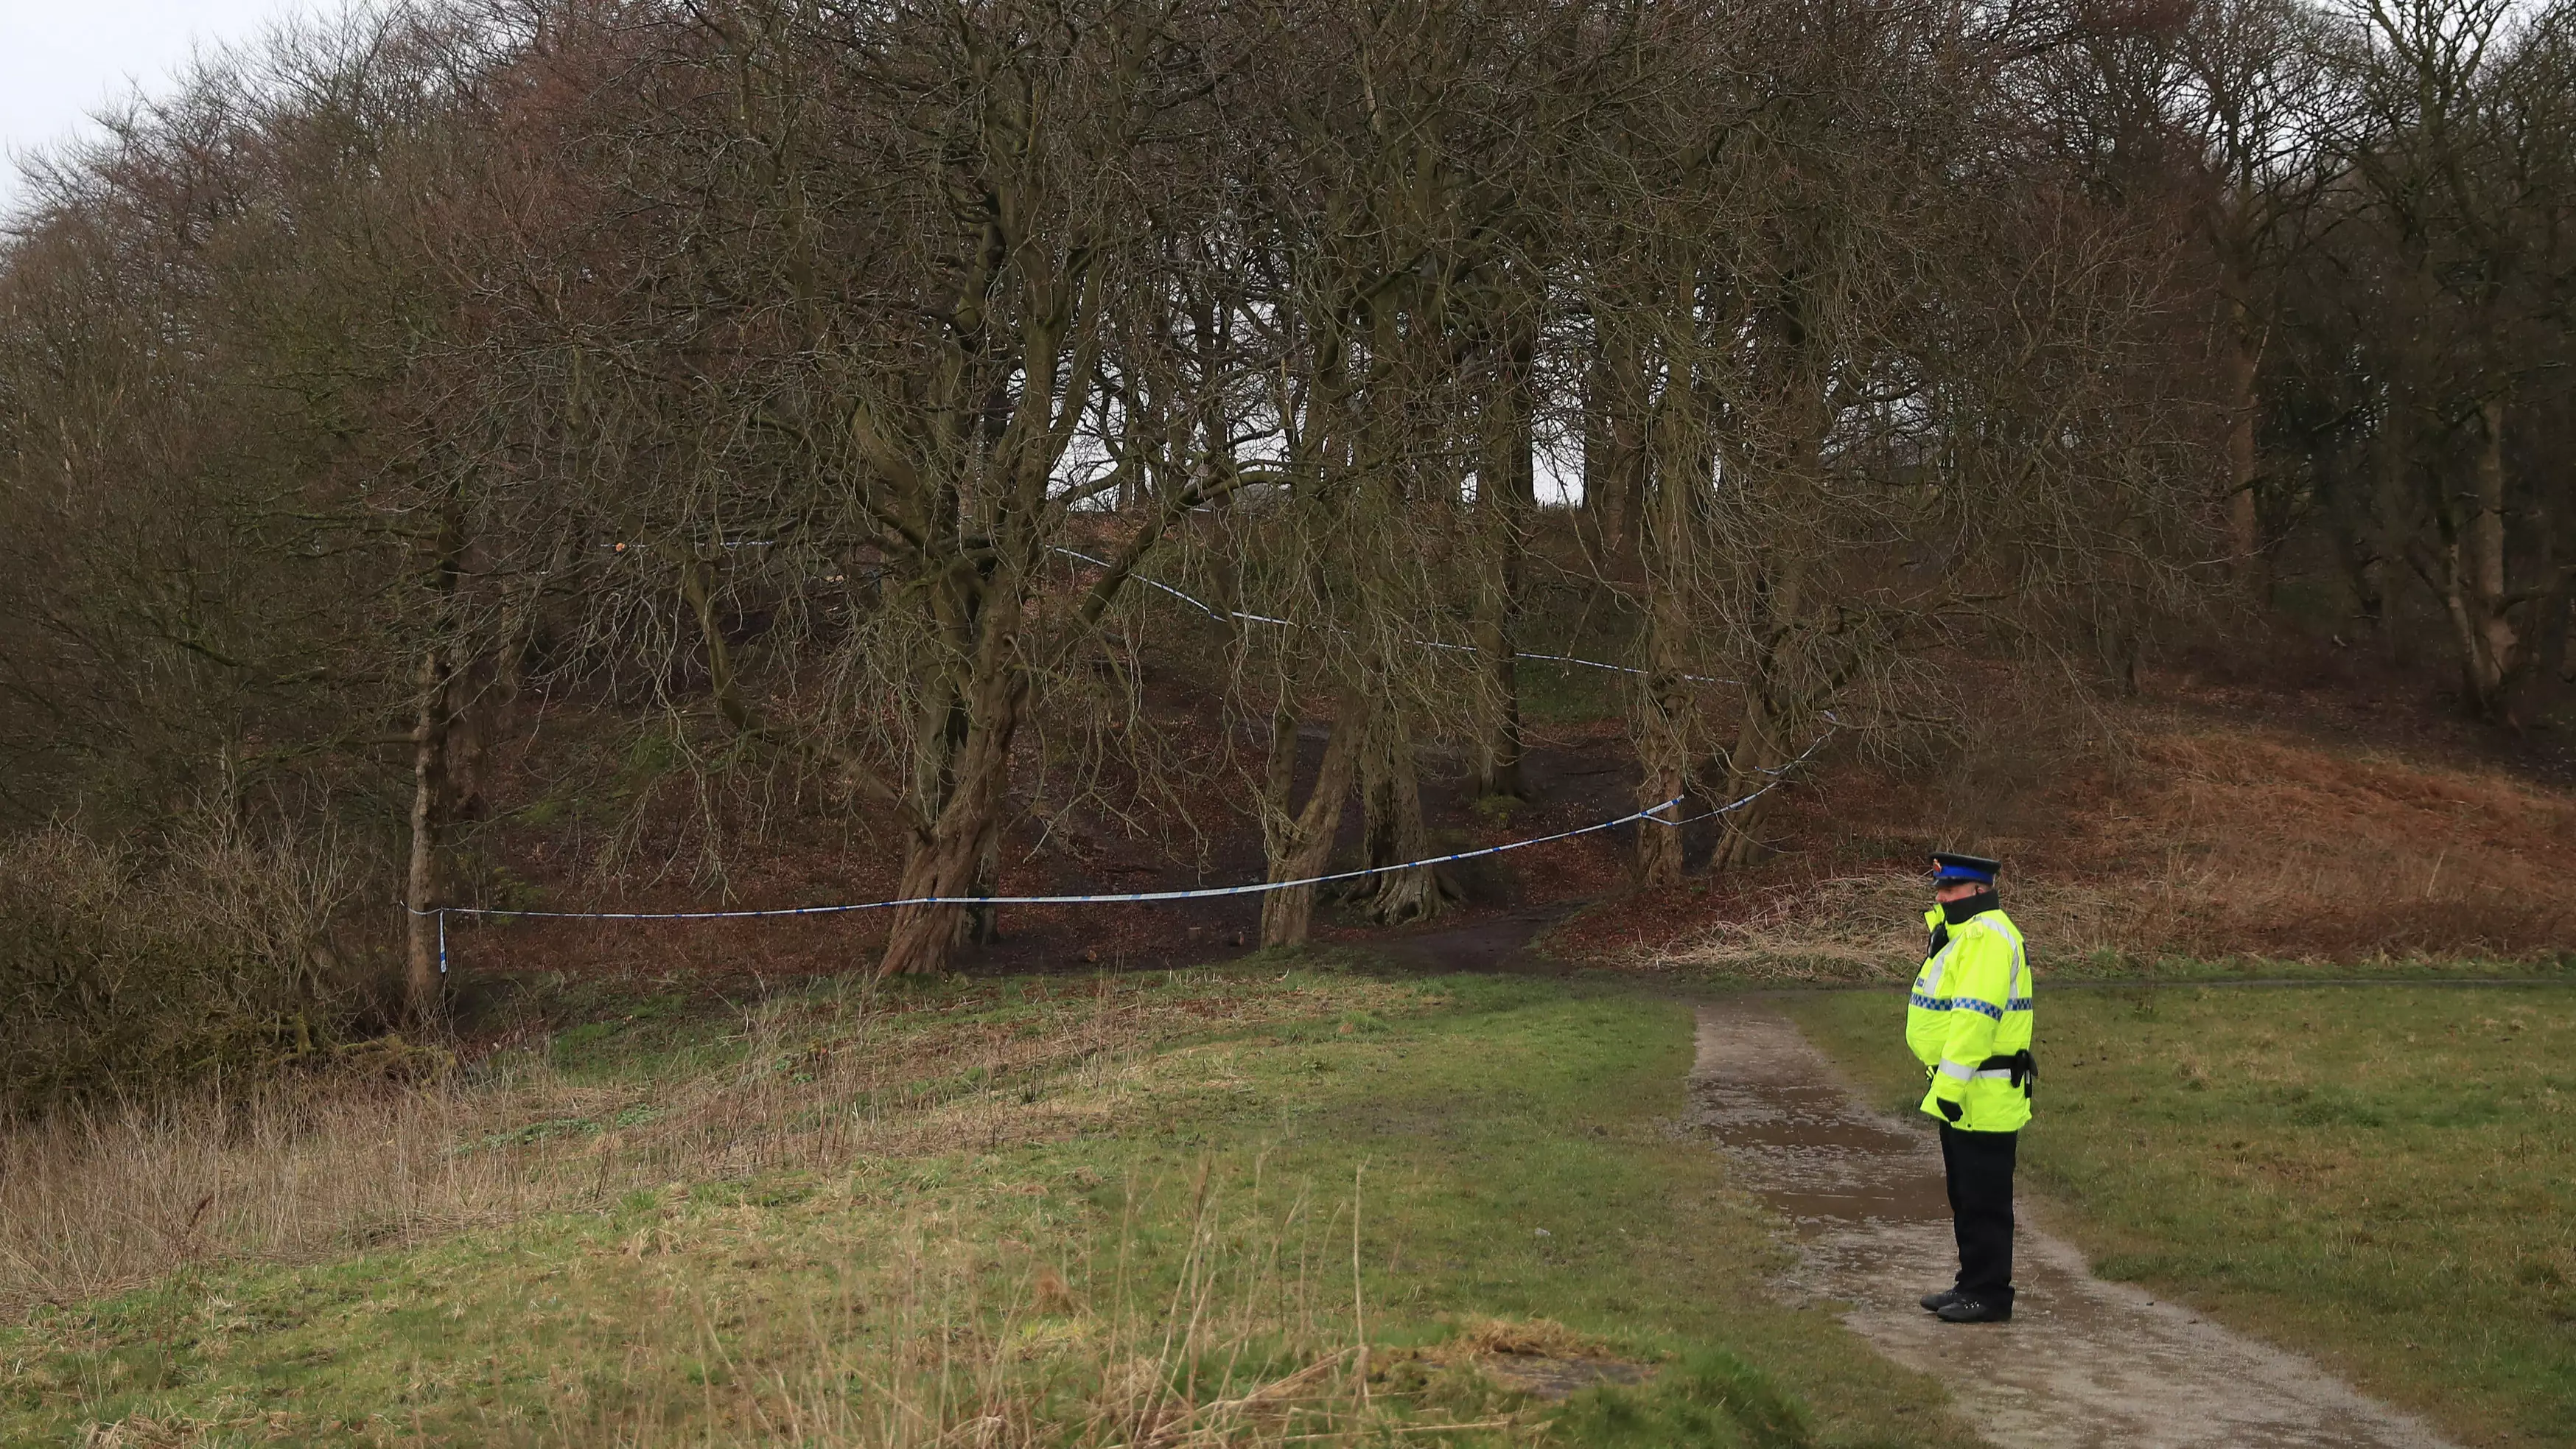 Two Adults Arrested On Suspicion Of Murder Of Baby Girl Found In Woods